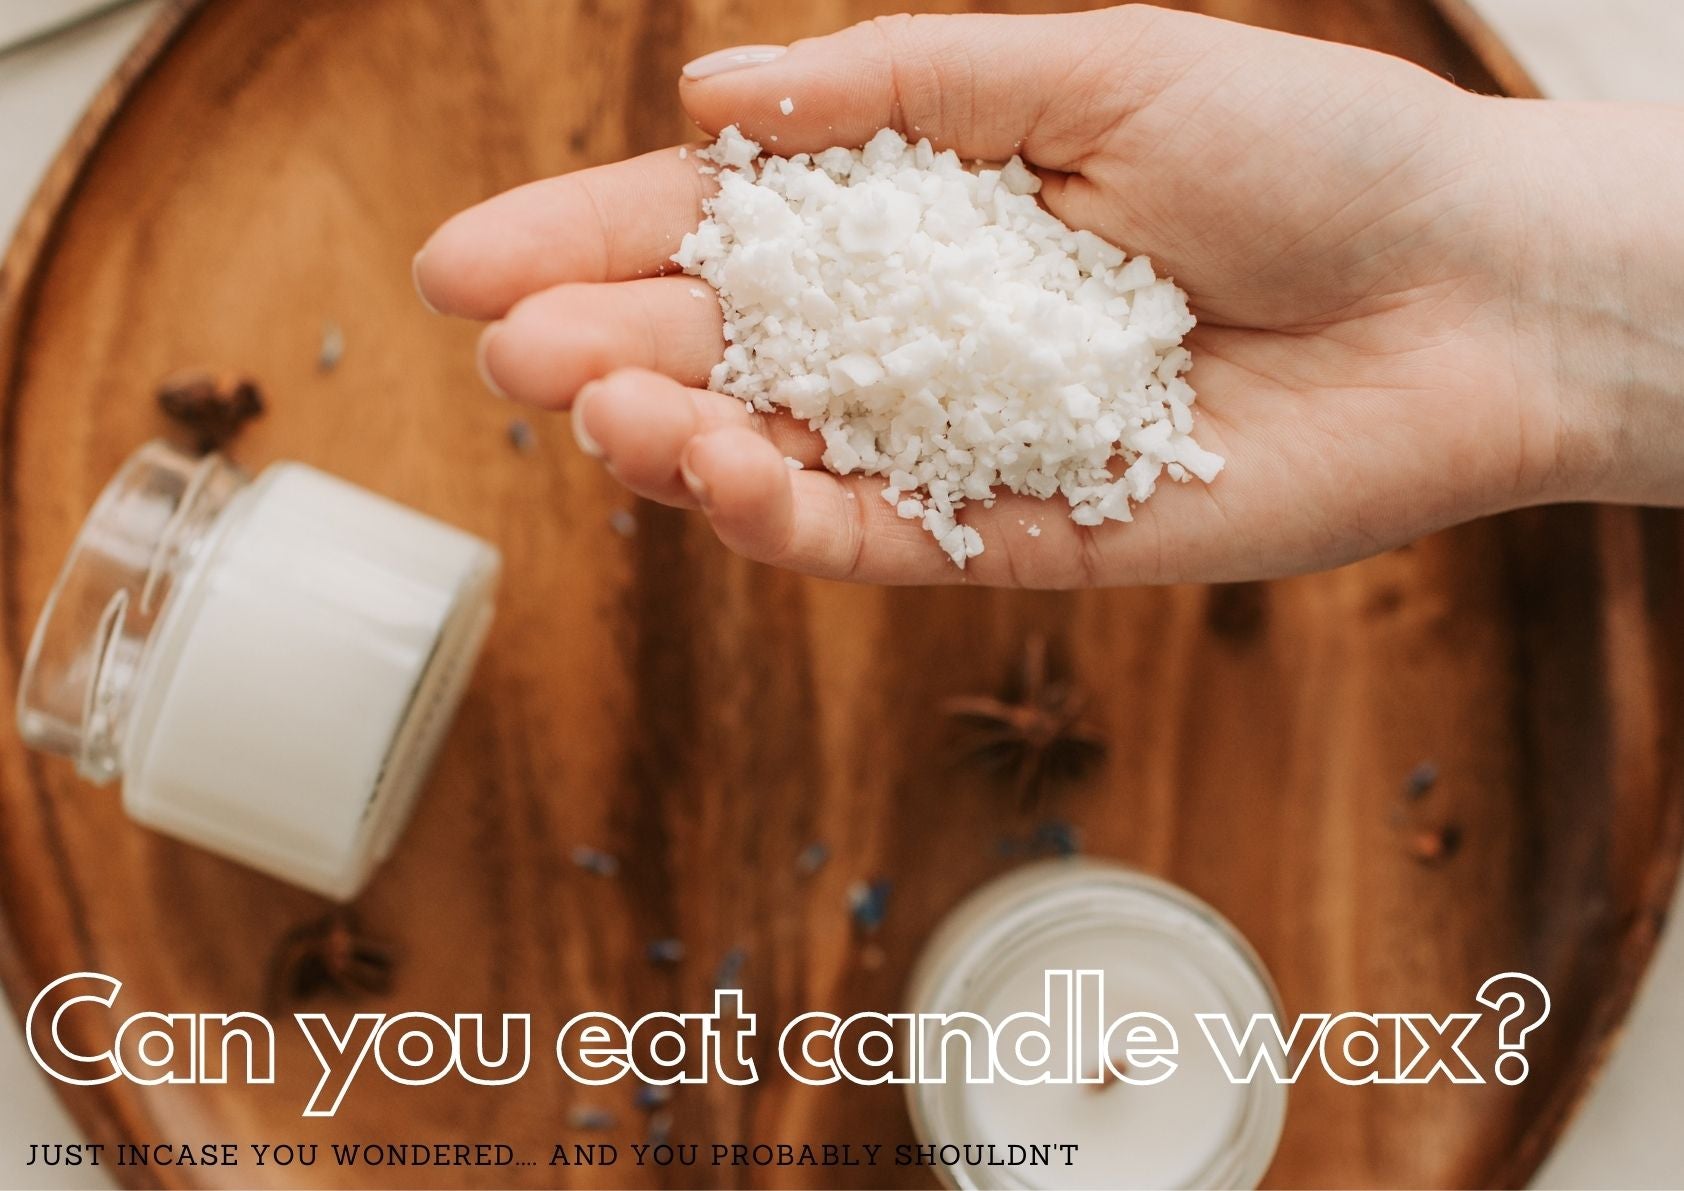 Can you eat candle wax?